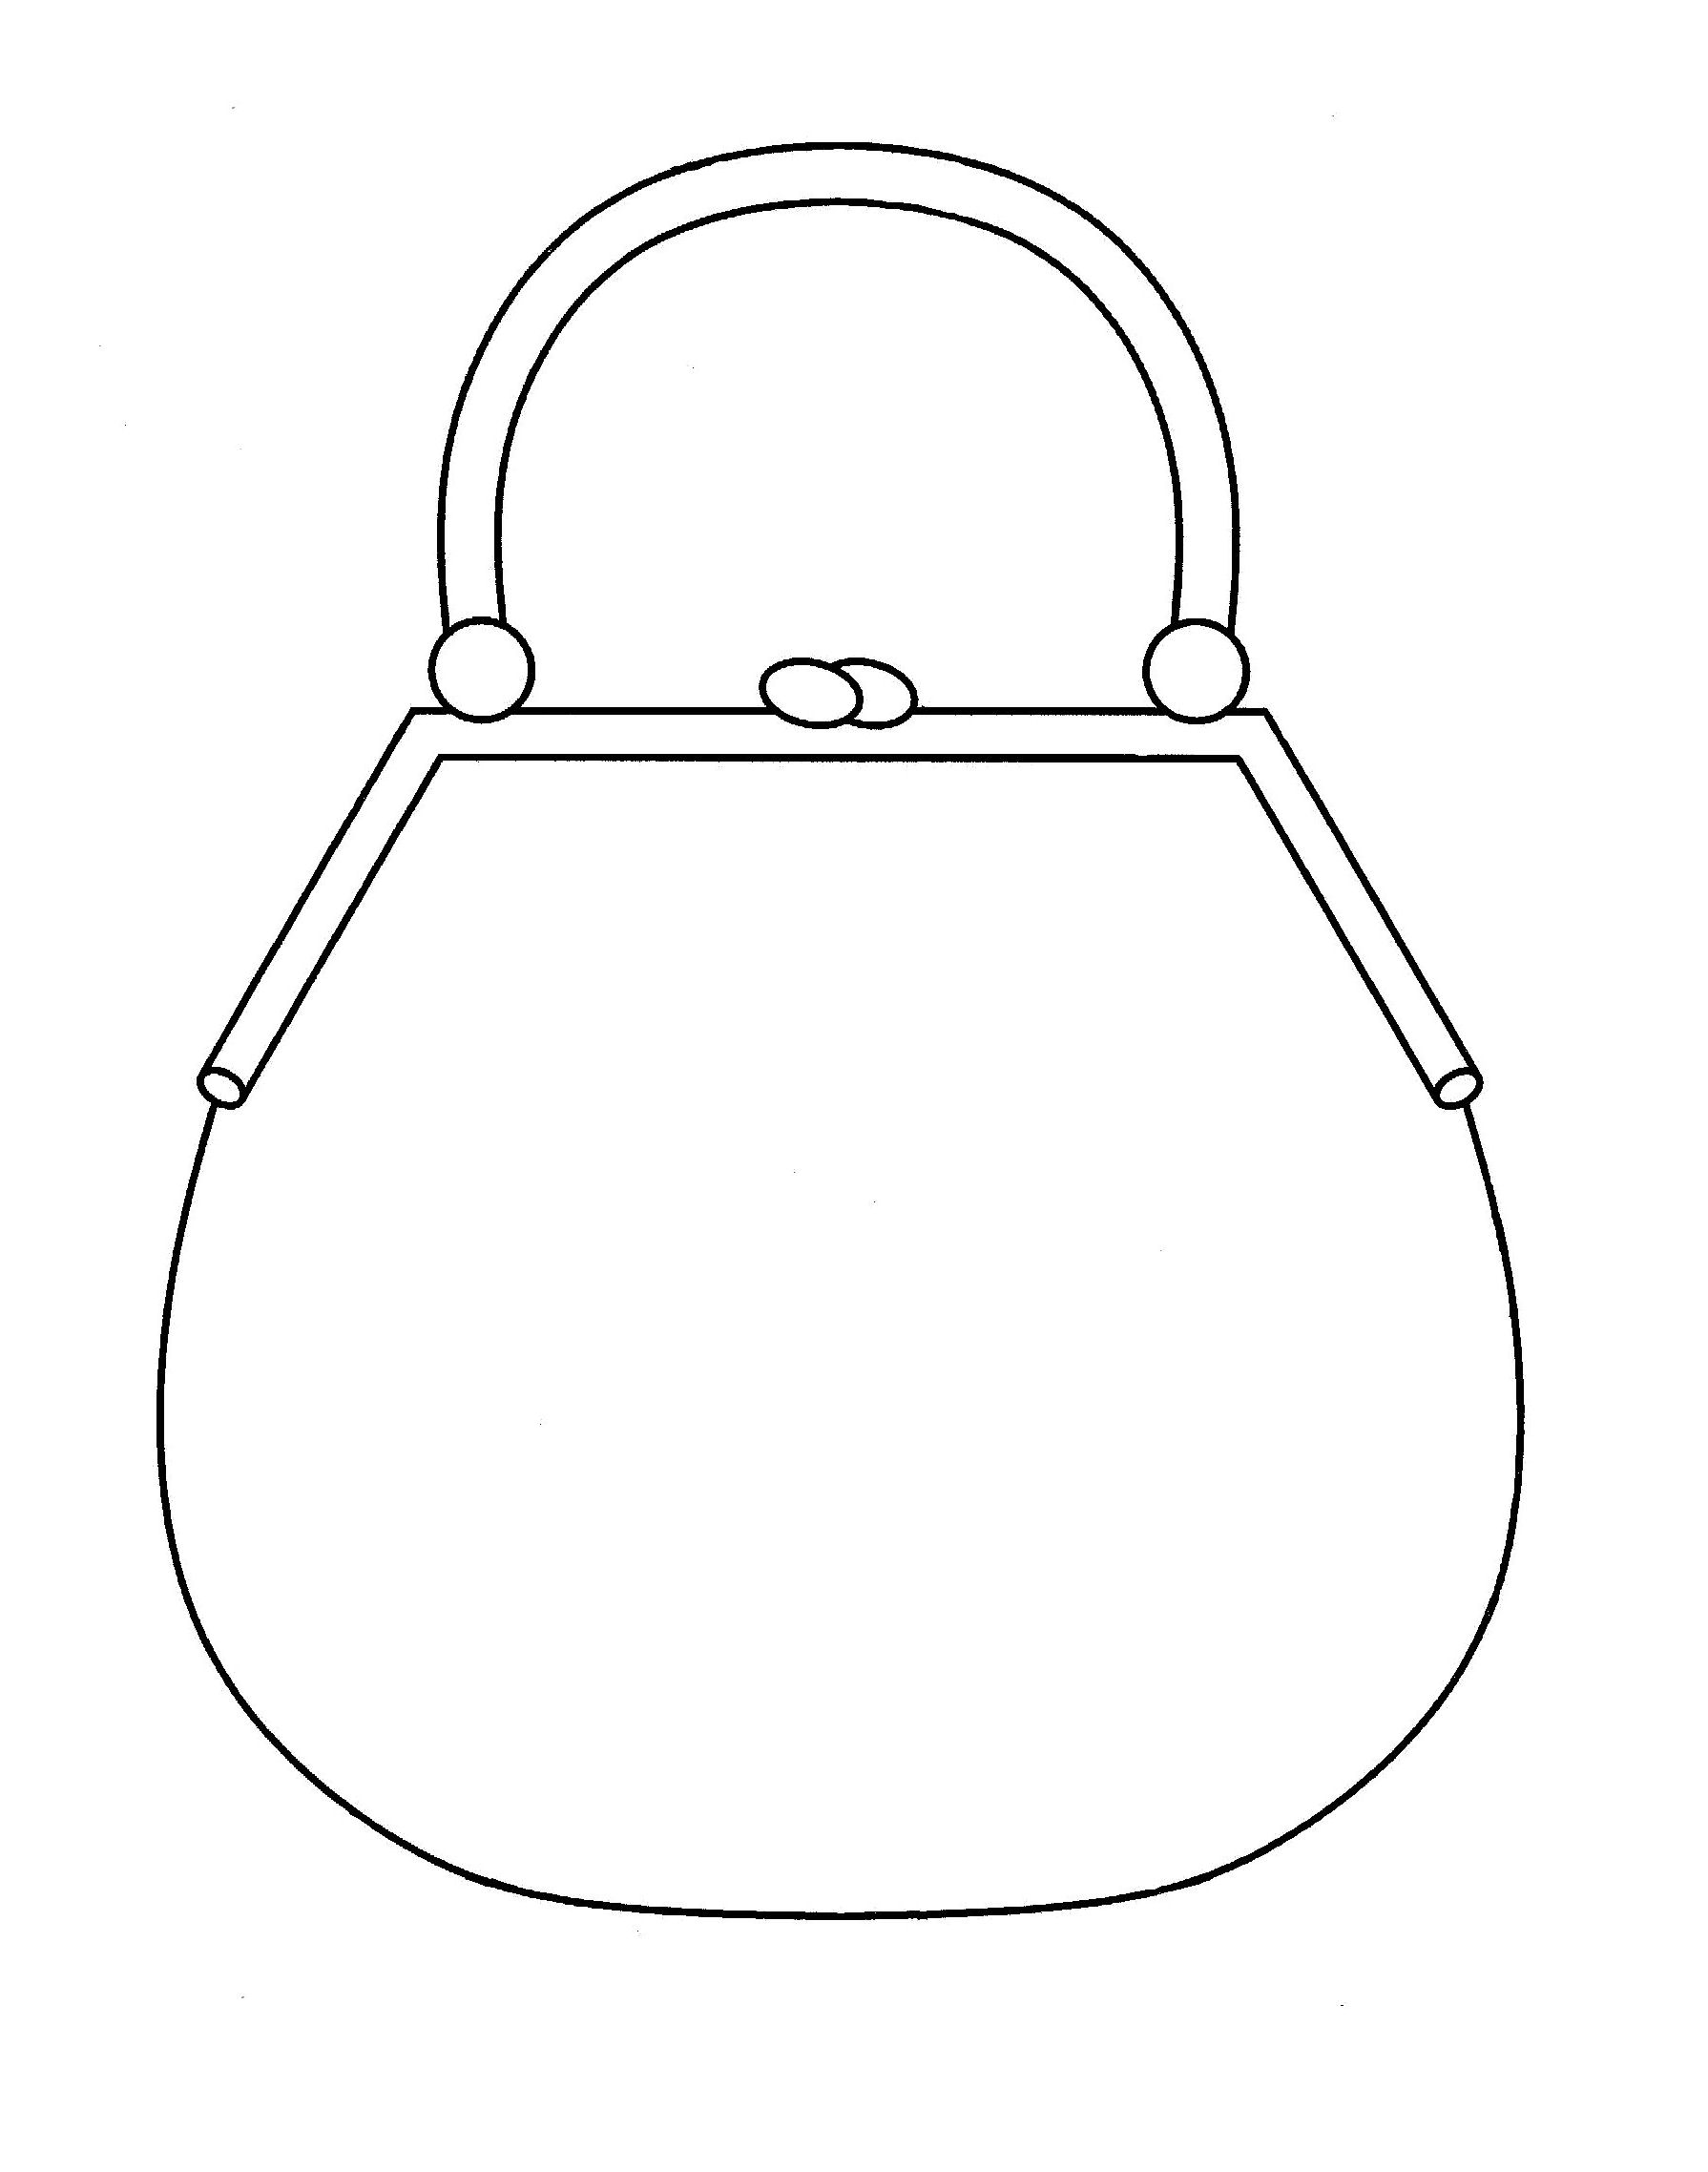 The best free Handbag drawing images. Download from 82 free drawings of